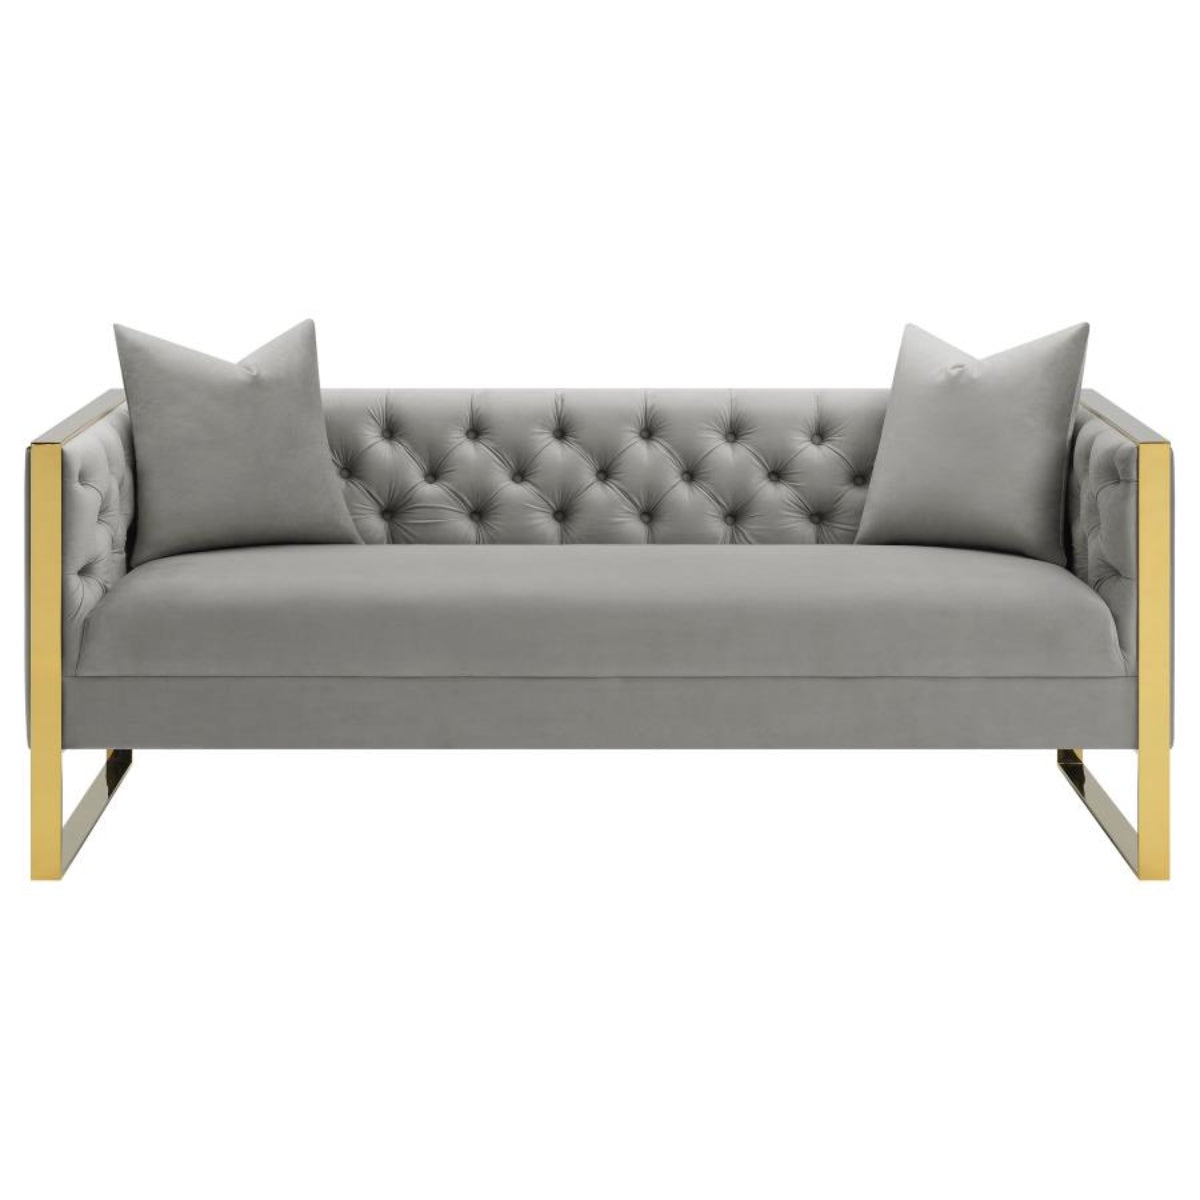 Living Room Set (Sofa and Loveseat) in Grey